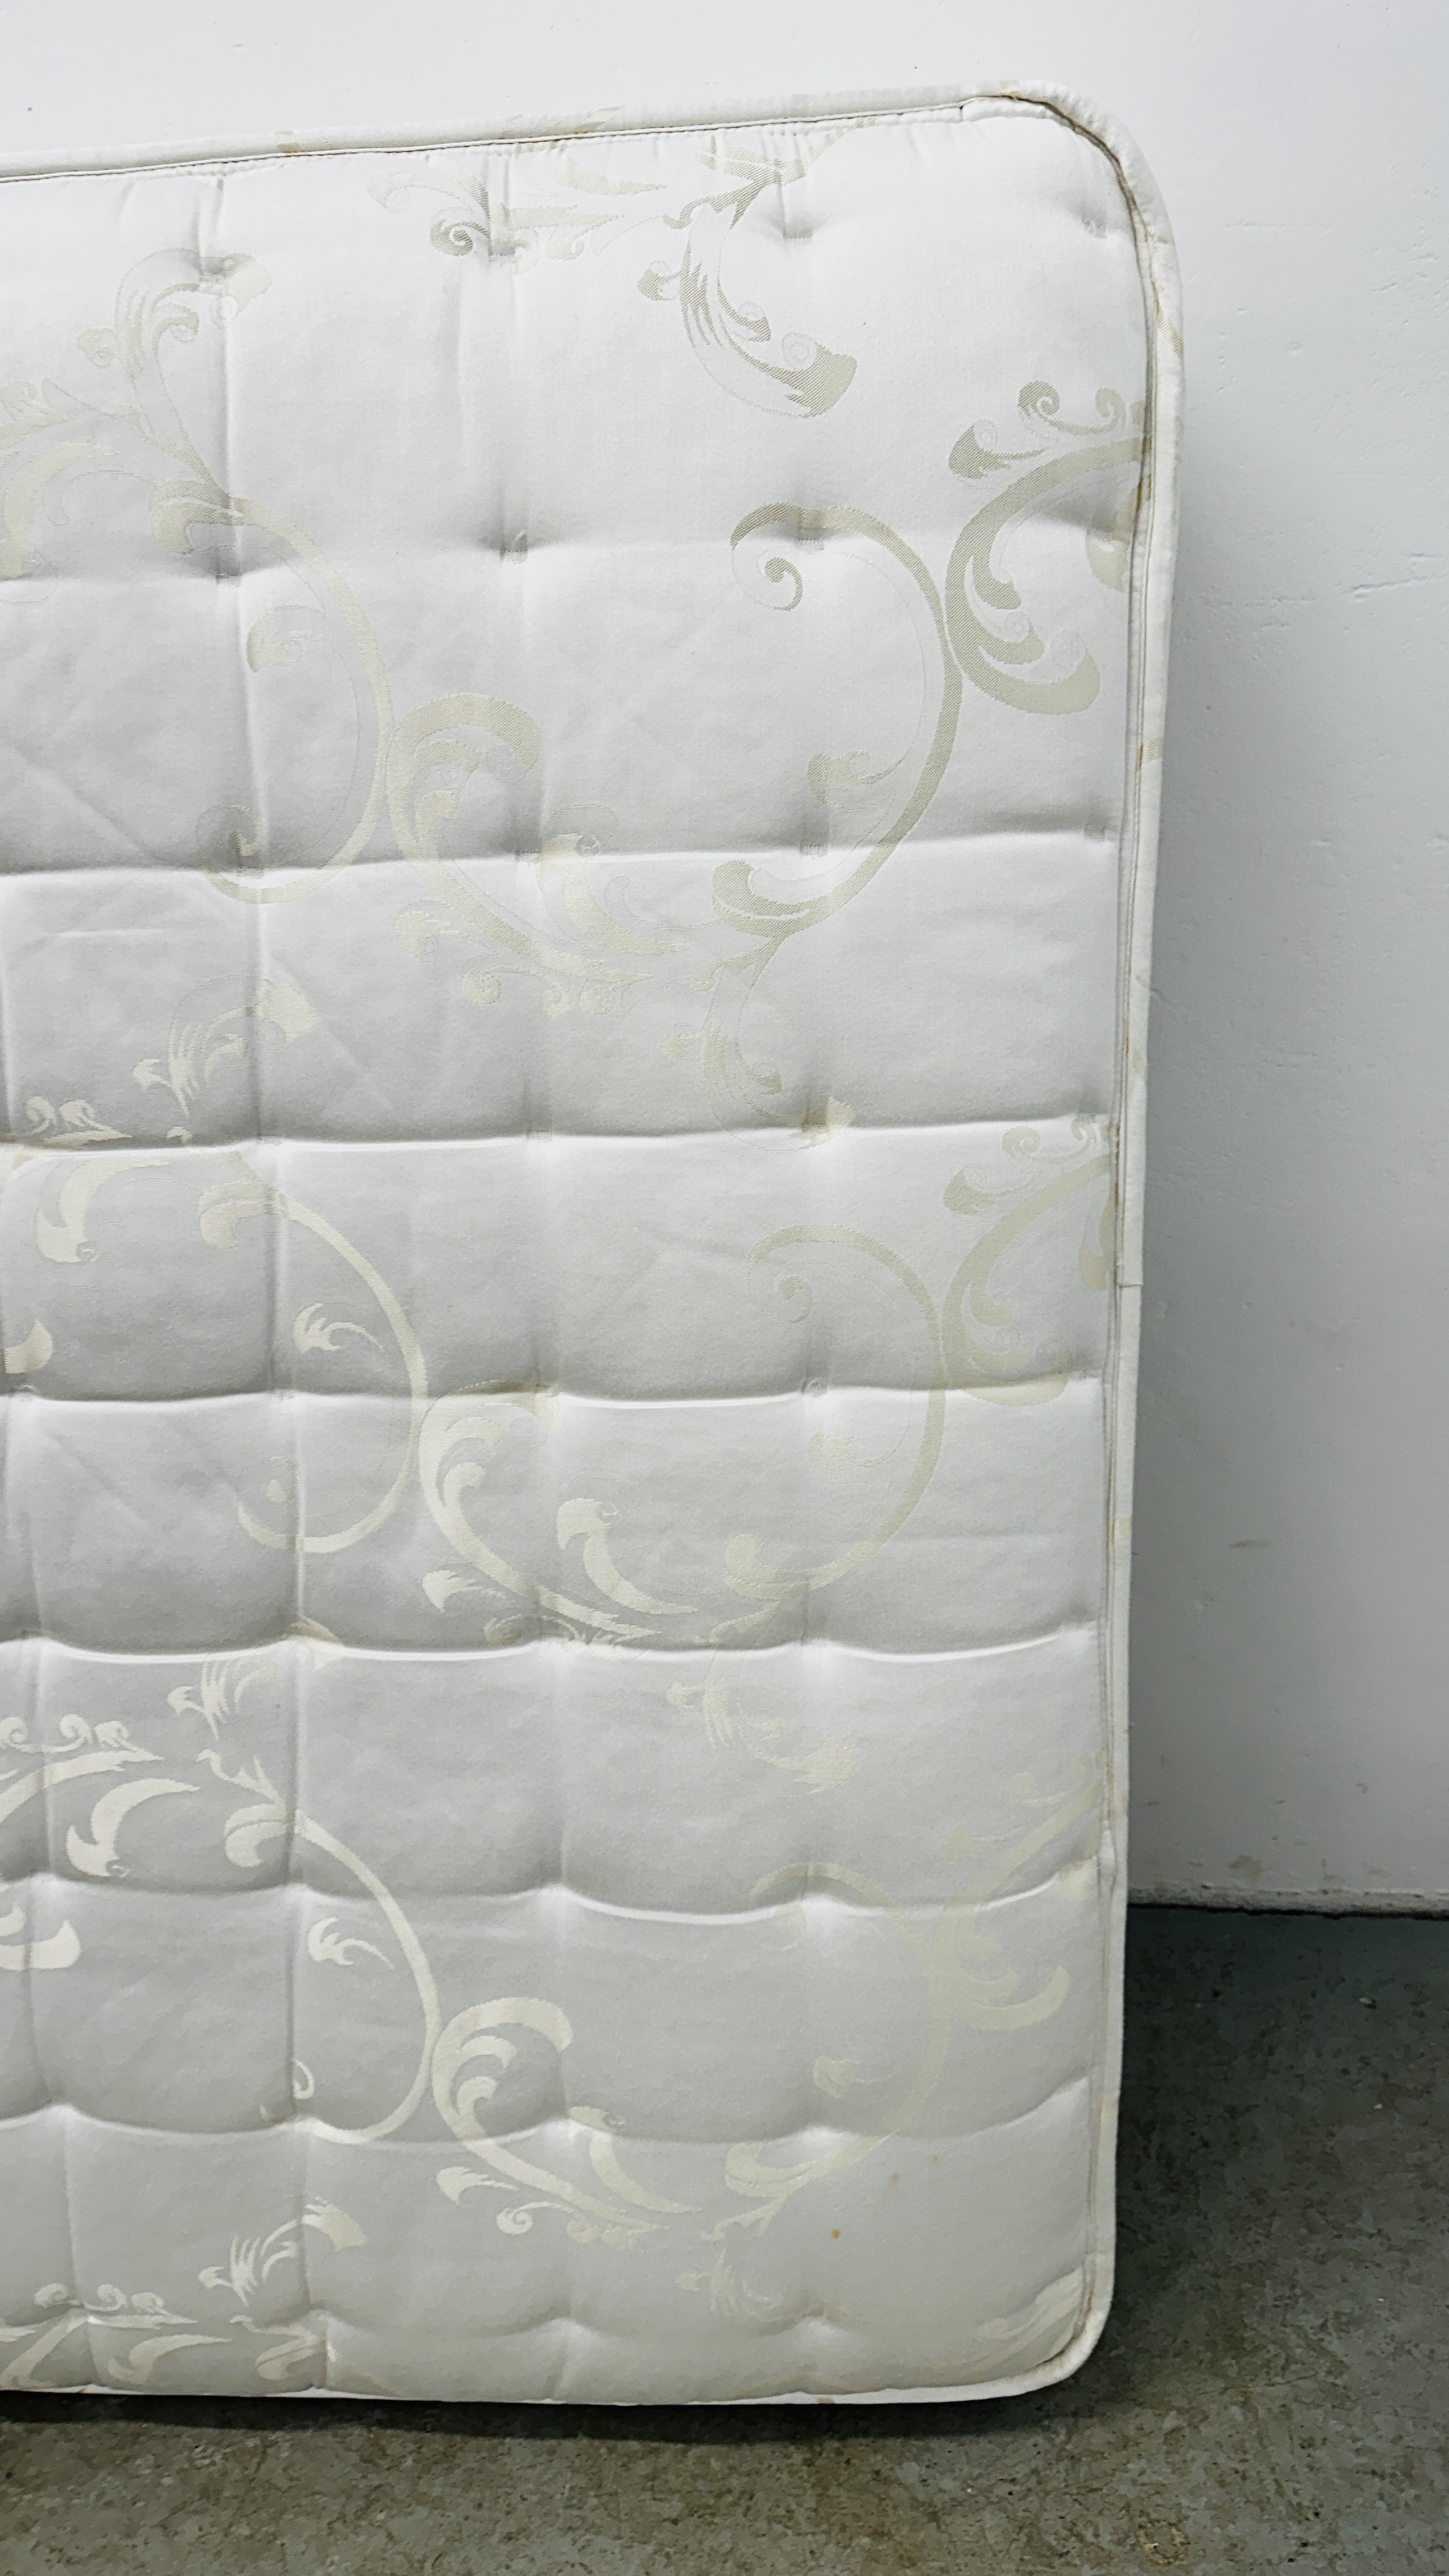 MYERS "AUGUSTA" DEEP QUILTED DOUBLE MATTRESS. - Image 5 of 10